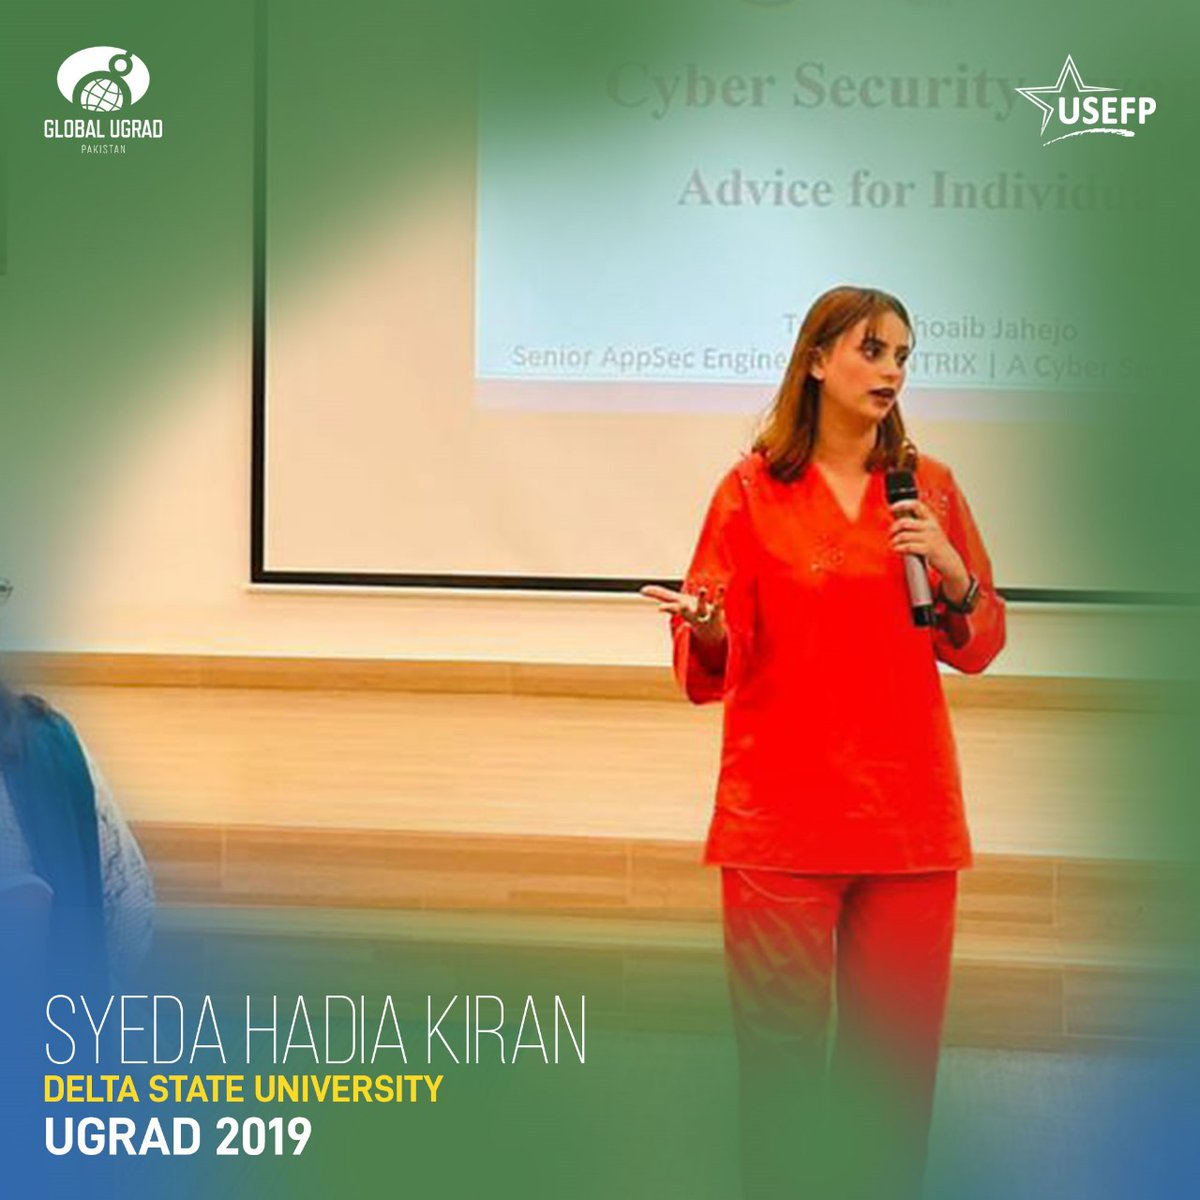 From navigating societal expectations to excelling in academia and professional endeavors, Syeda Hadia inspires young girls. She advocates for change through initiatives such as Cyber Smart, AI Implications in Higher Education, and Women in Action. #USEFP #URGAD